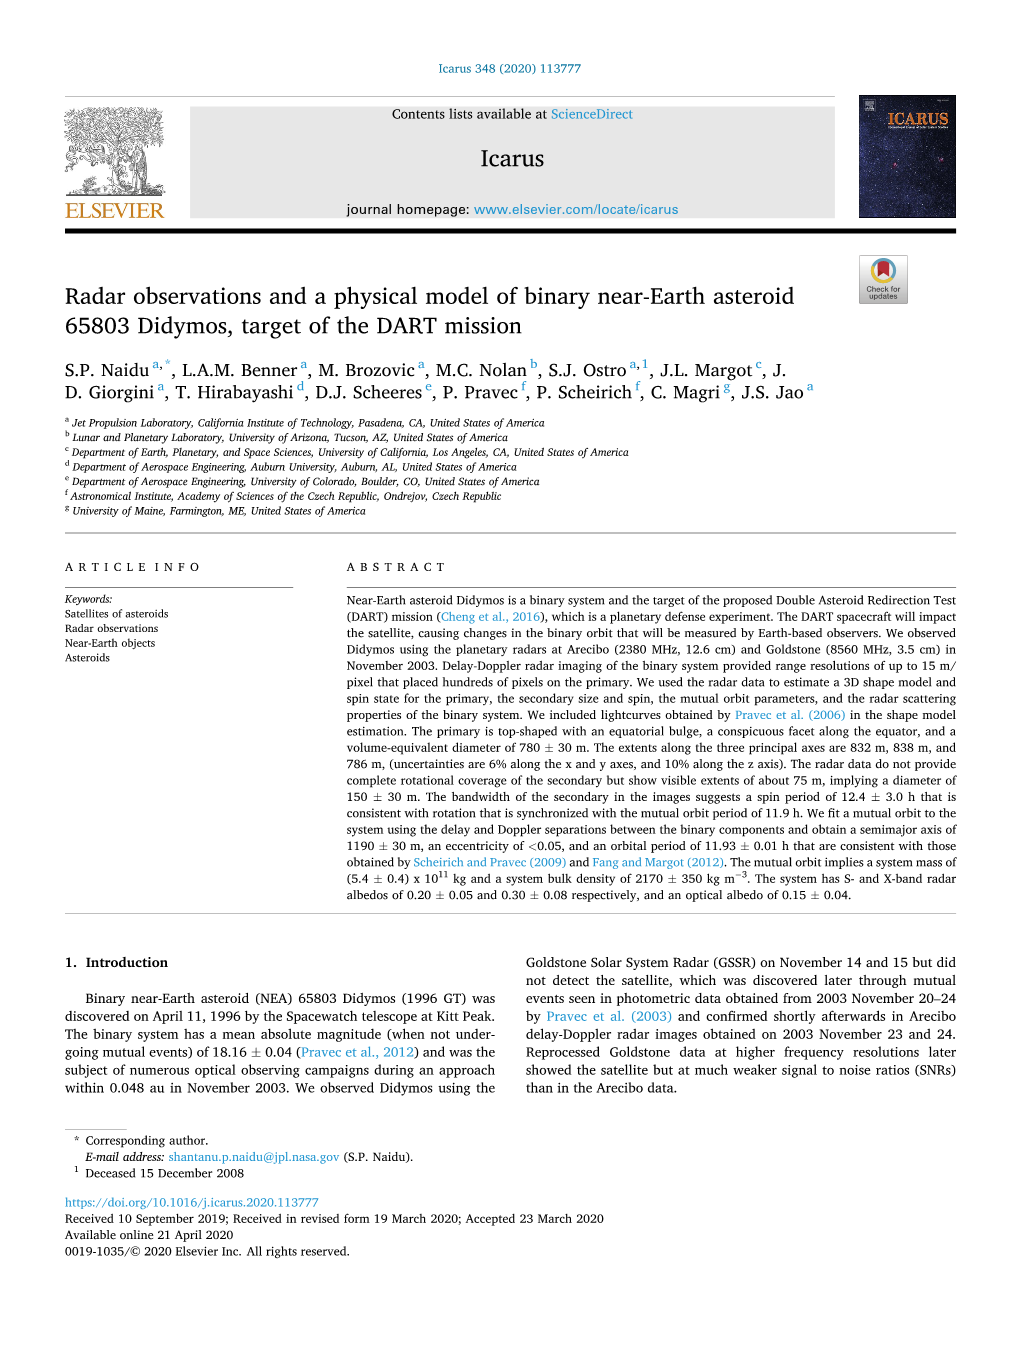 Radar Observations and a Physical Model of Binary Near-Earth Asteroid 65803 Didymos, Target of the DART Mission